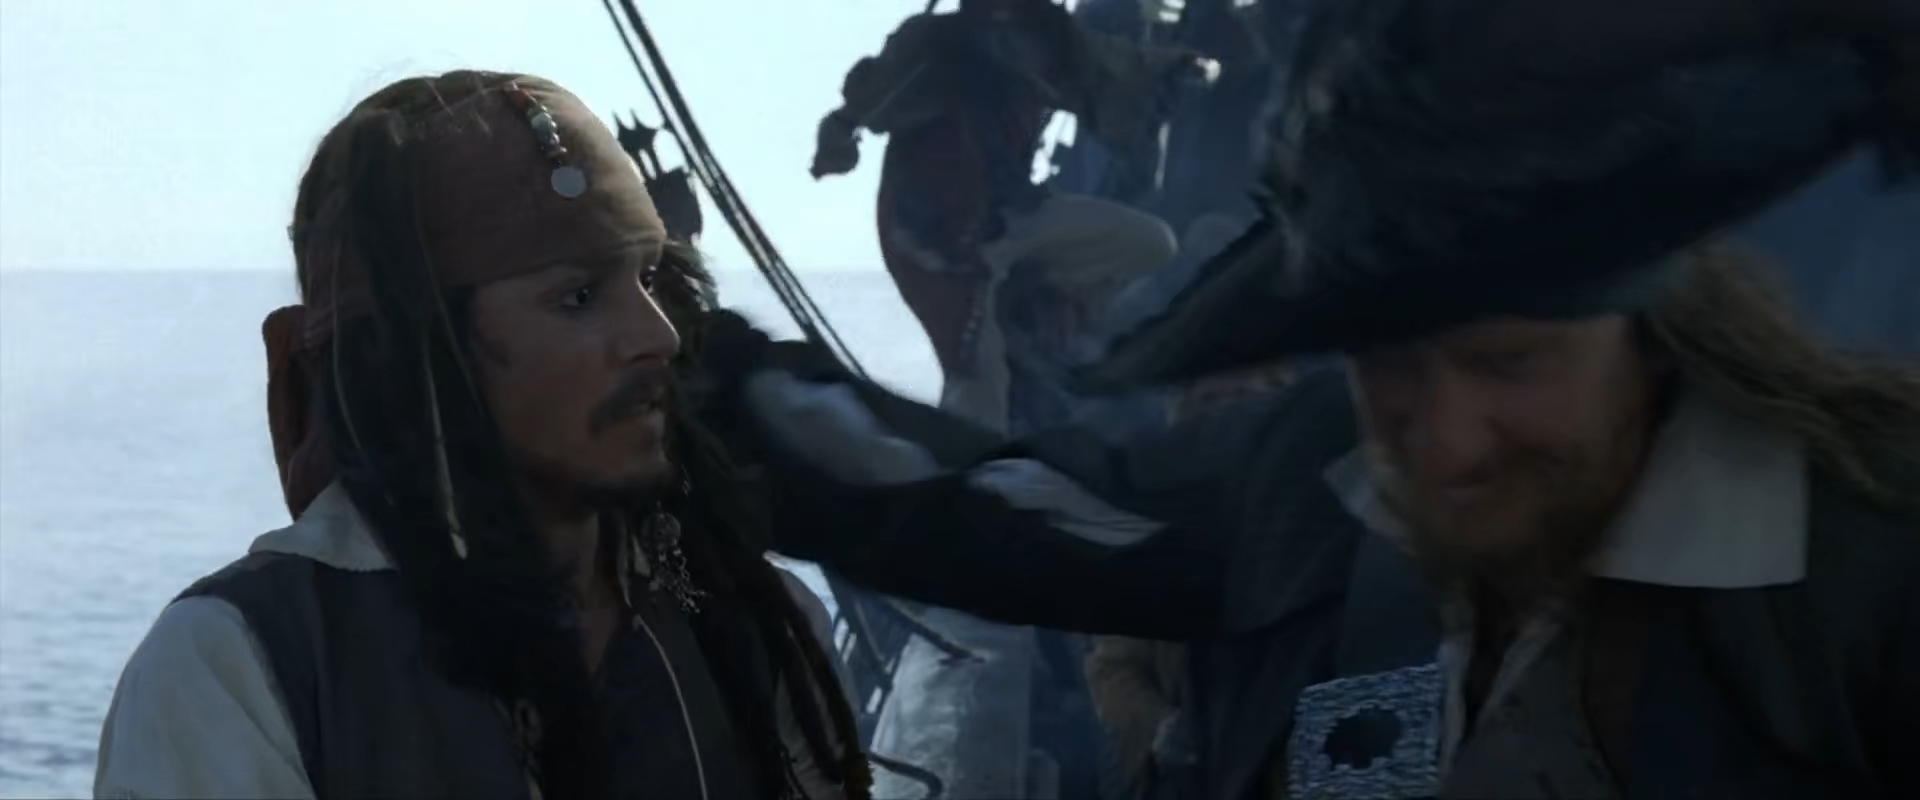 Pirates of the Caribbean download the last version for windows